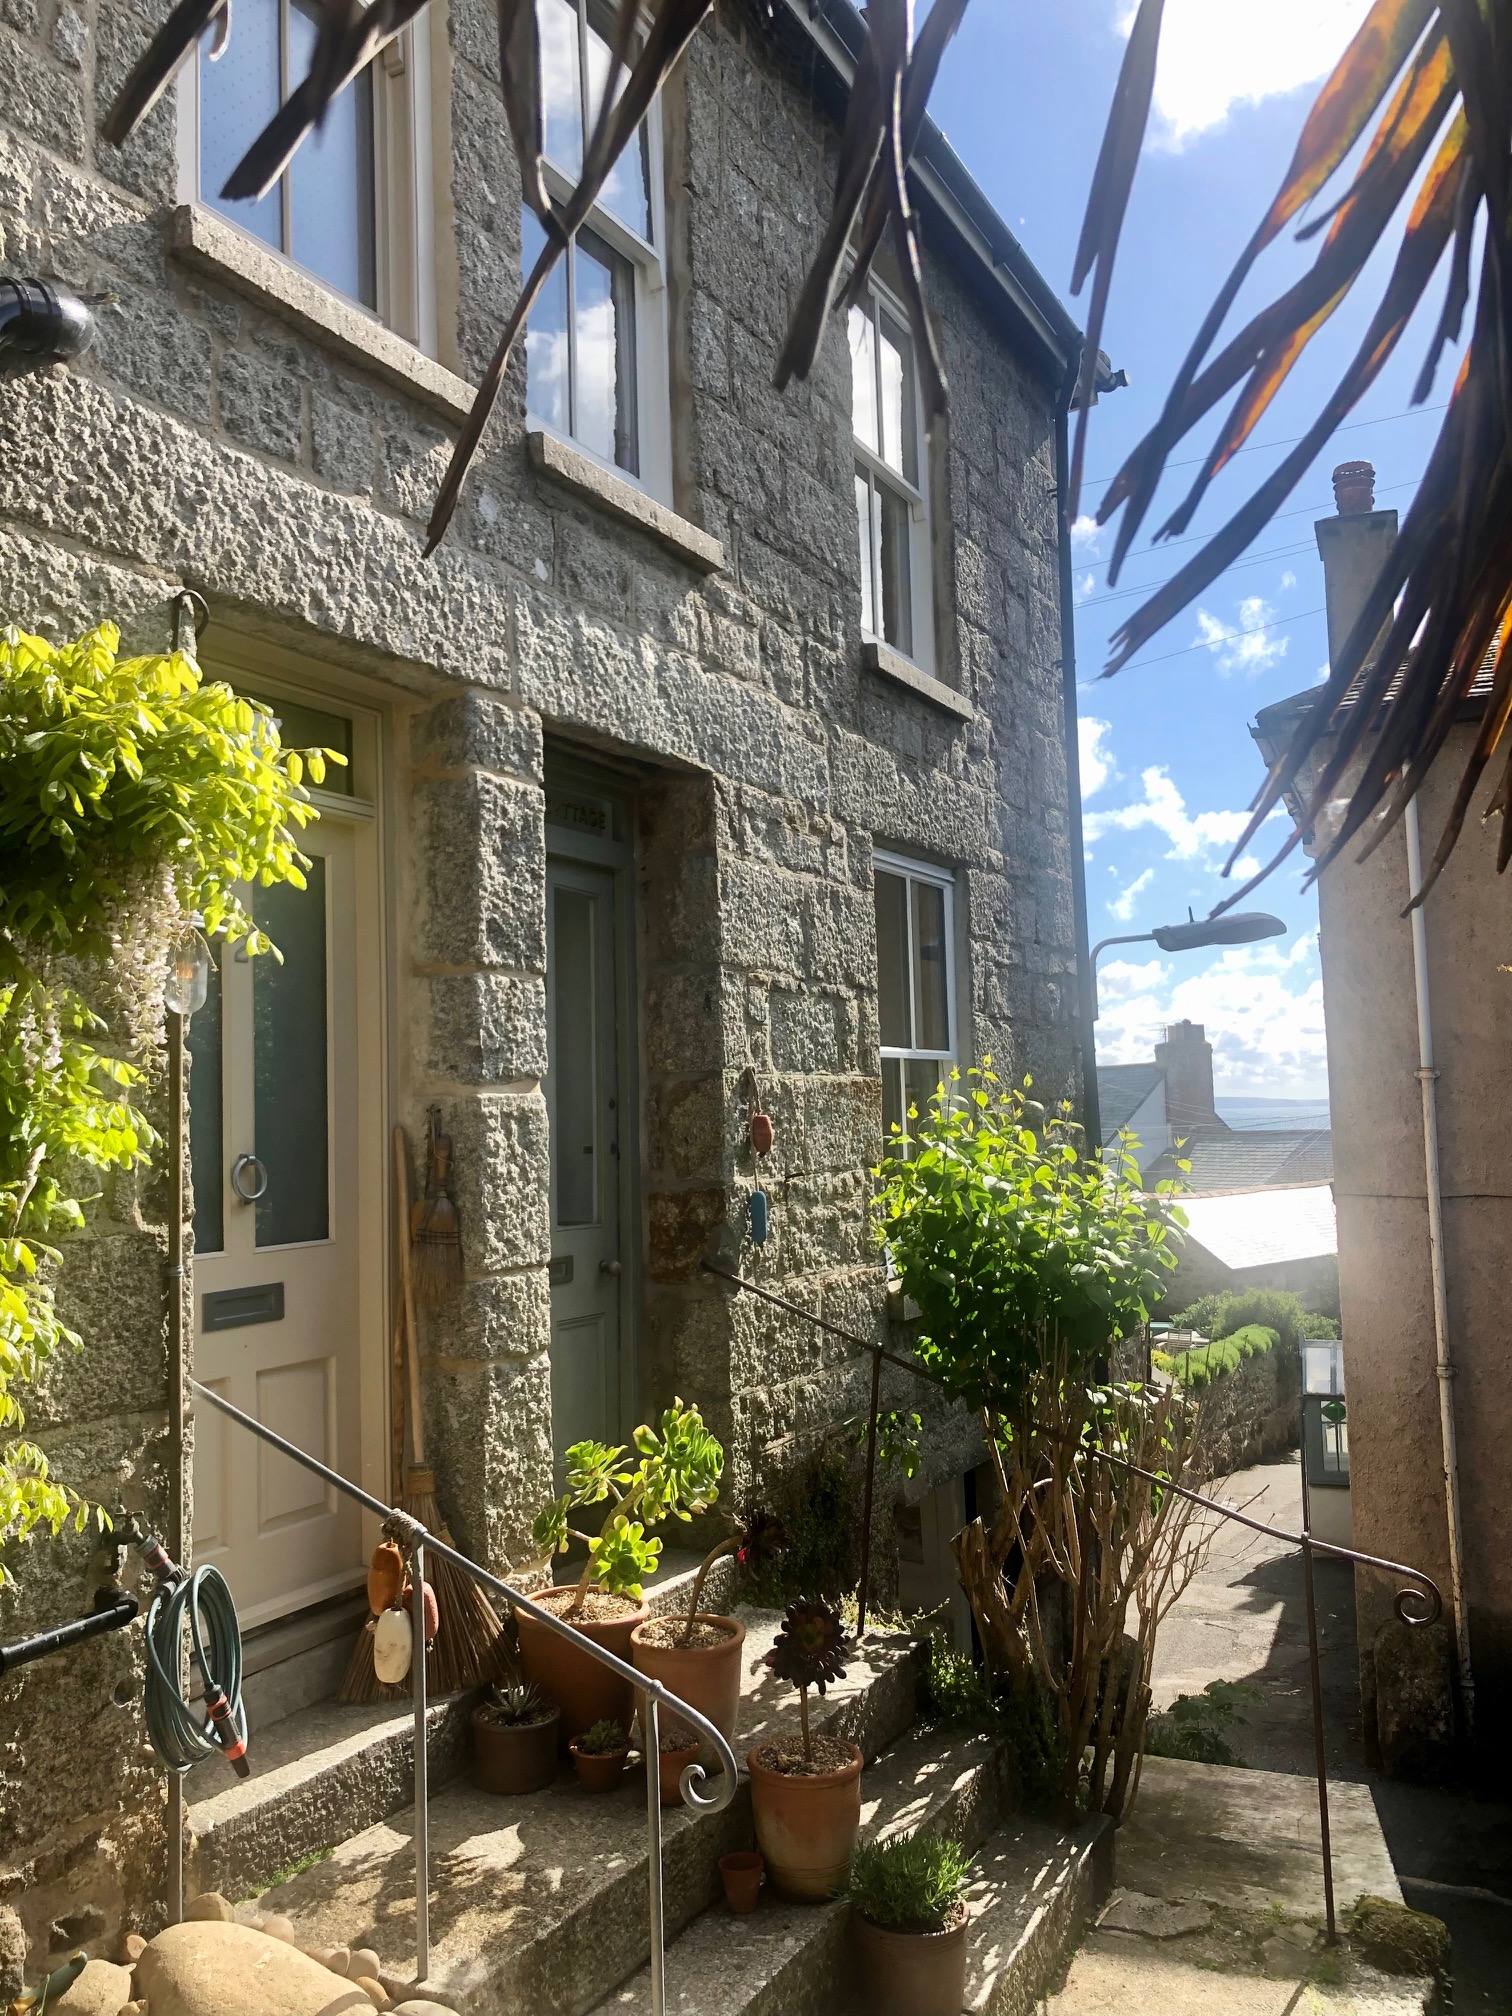 Janies cottage Mousehole Eclectic Interiors